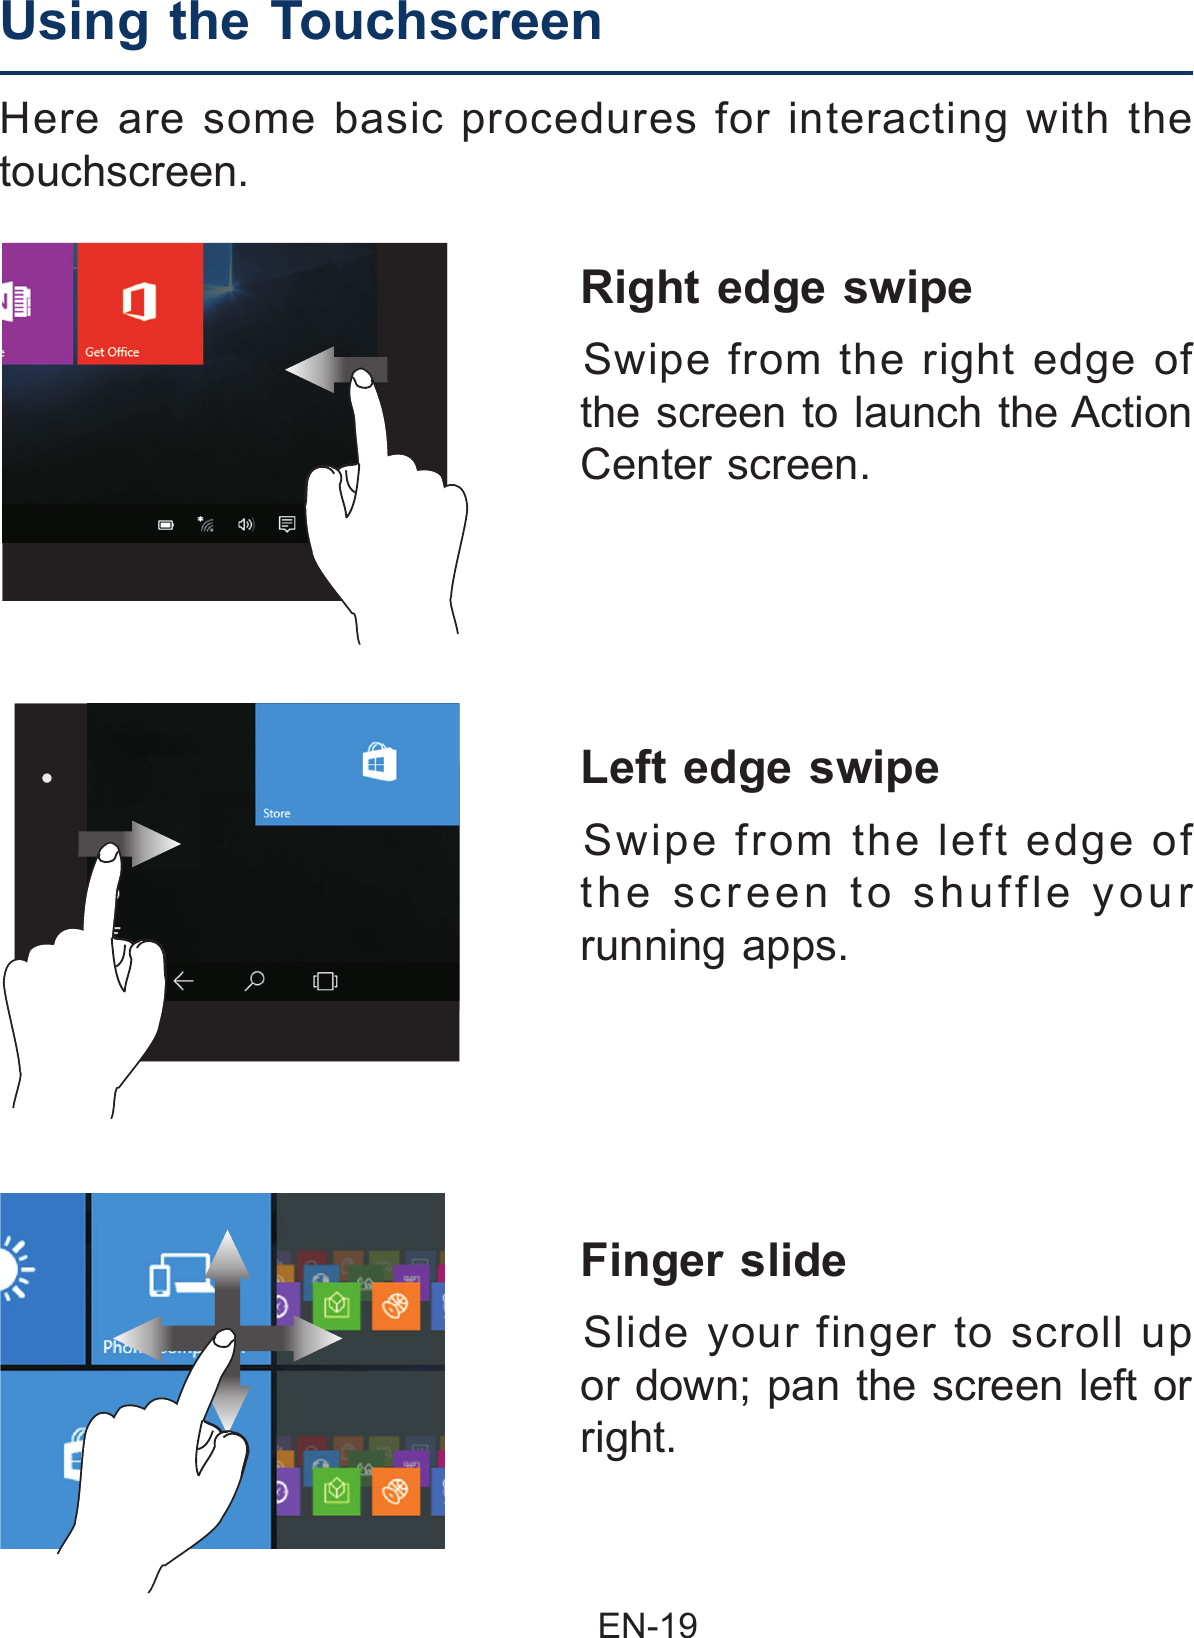                                                EN-19 Finger slide  Slide your finger to scroll up or down; pan the screen left or right.Left edge swipe  Swipe from the left edge of the screen to shuffle your running apps.Here are some basic procedures for interacting with the touchscreen.Right edge swipe  Swipe from the right edge of the screen to launch the Action Center screen.Using the Touchscreen